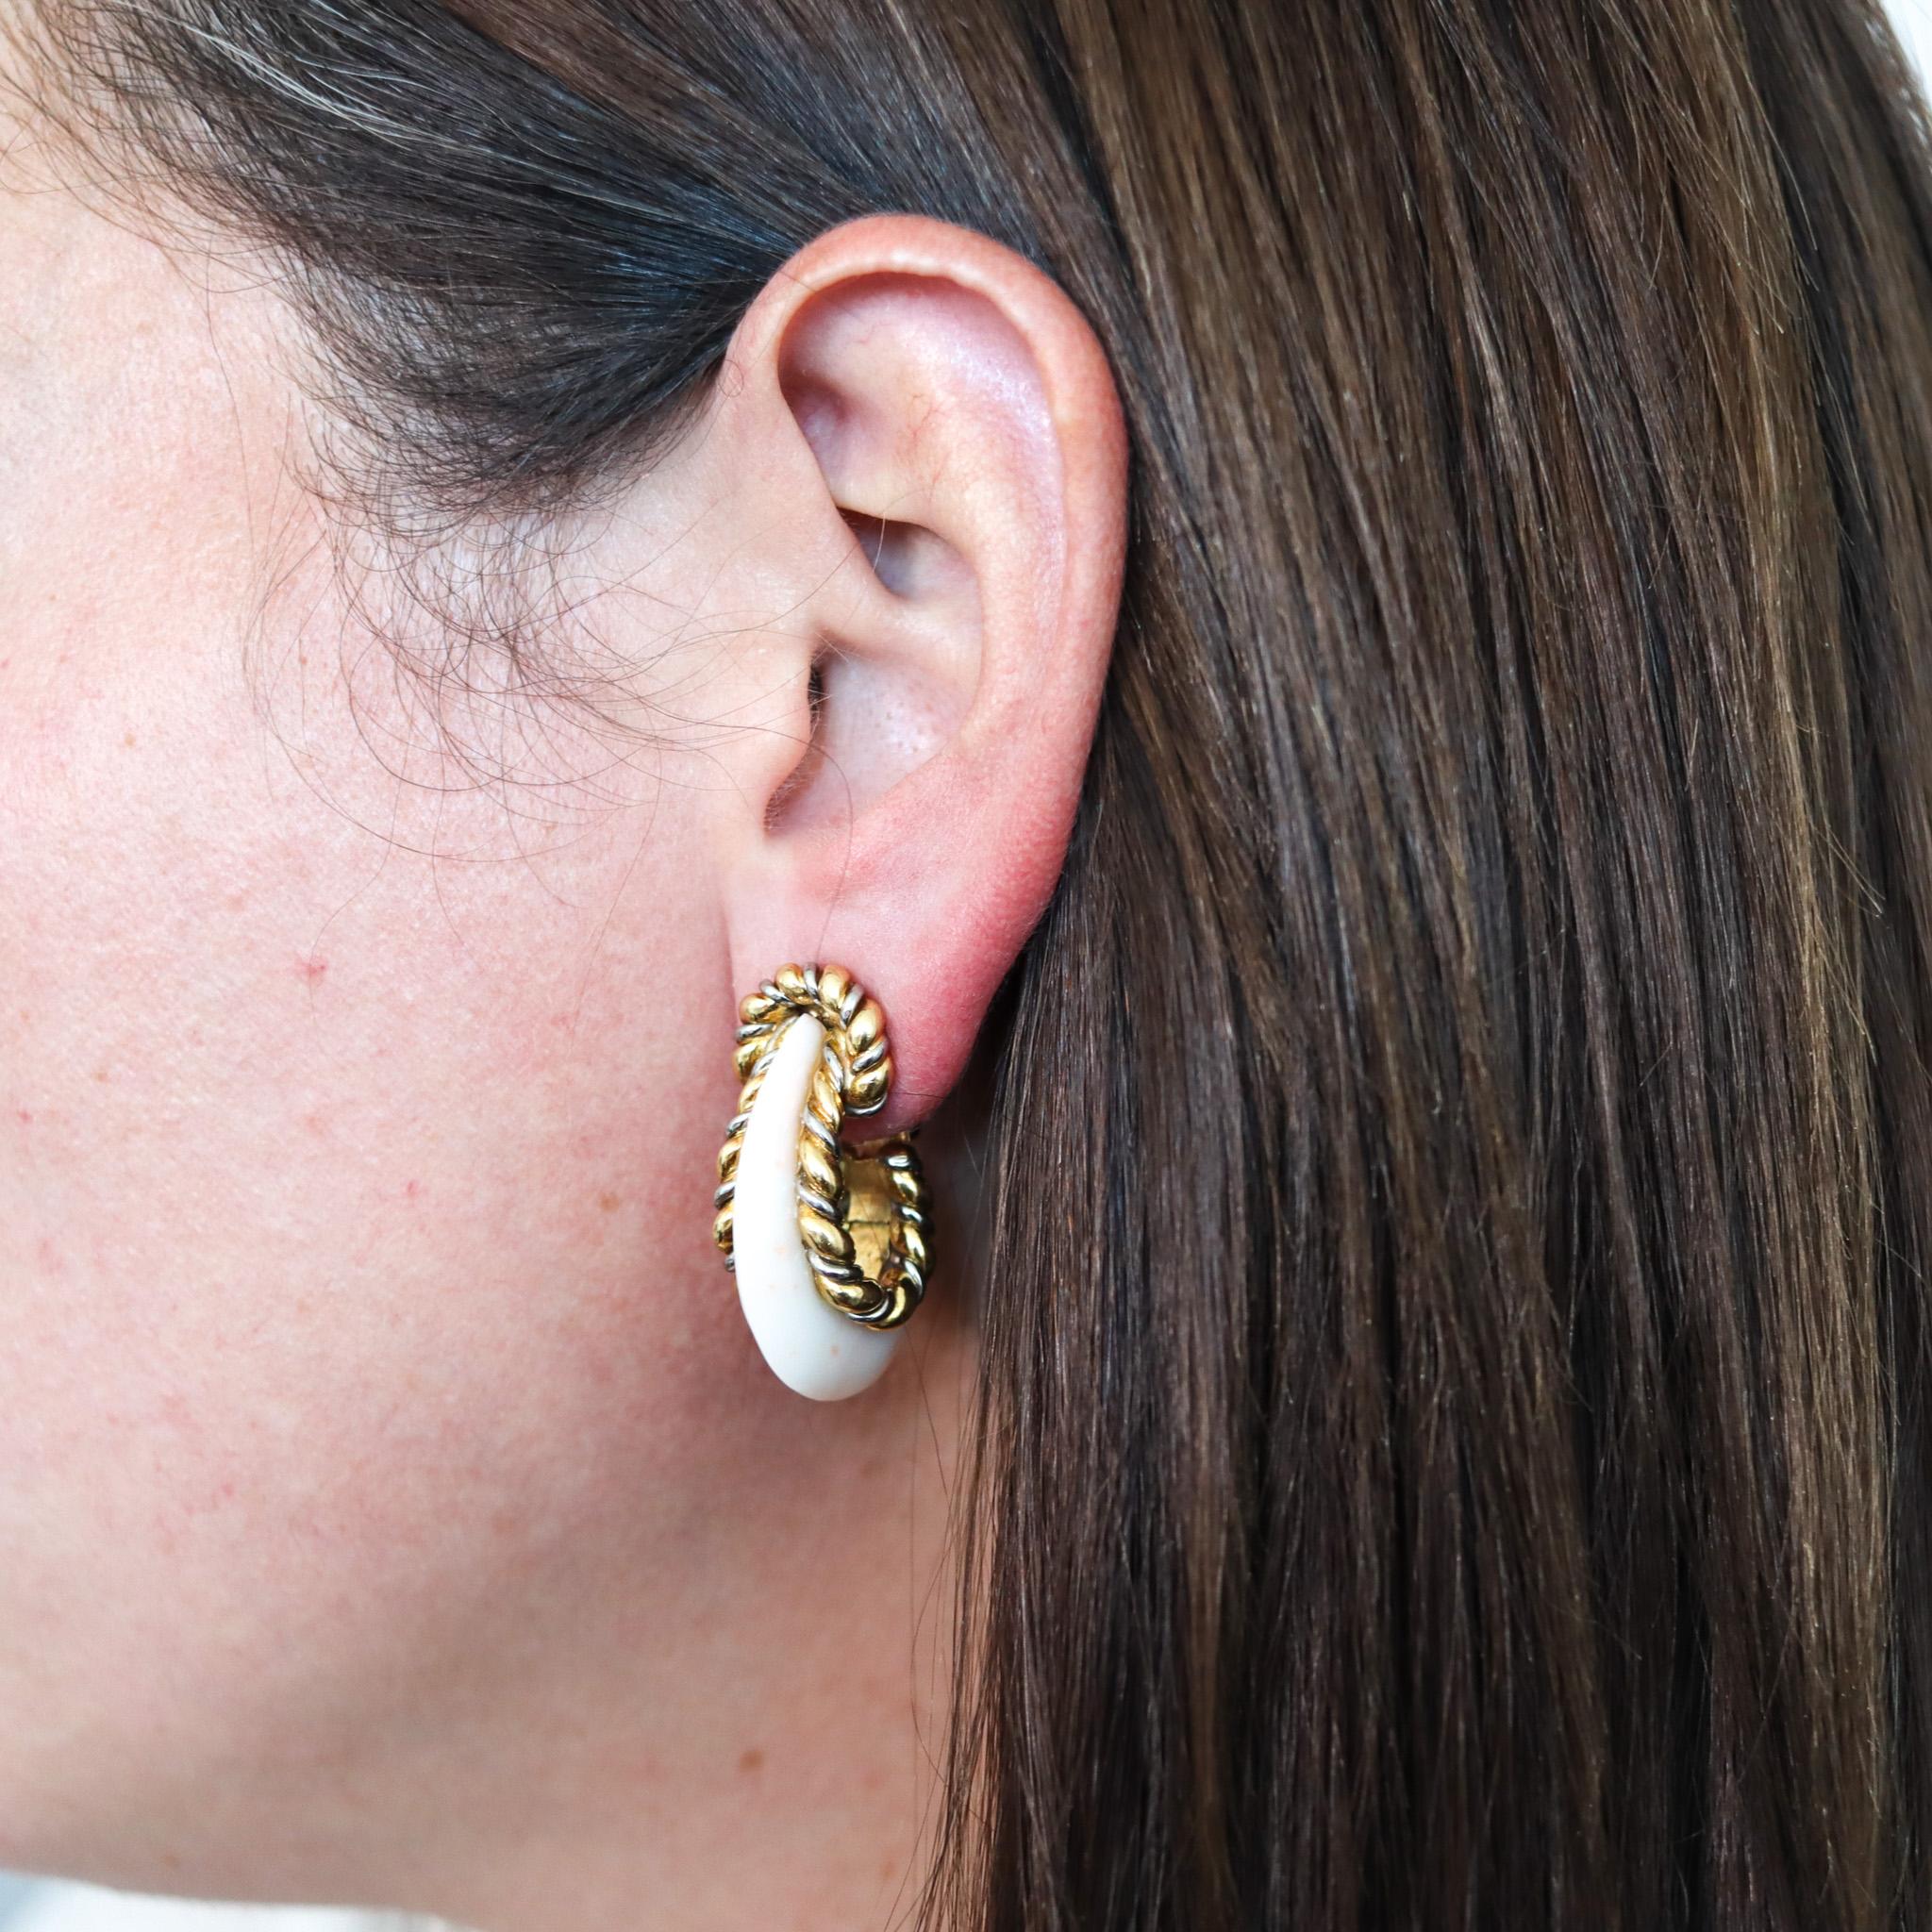 Fred of Paris 1970 Modernist Hoop Earrings In 18Kt Yellow Gold With Carved Coral For Sale 3